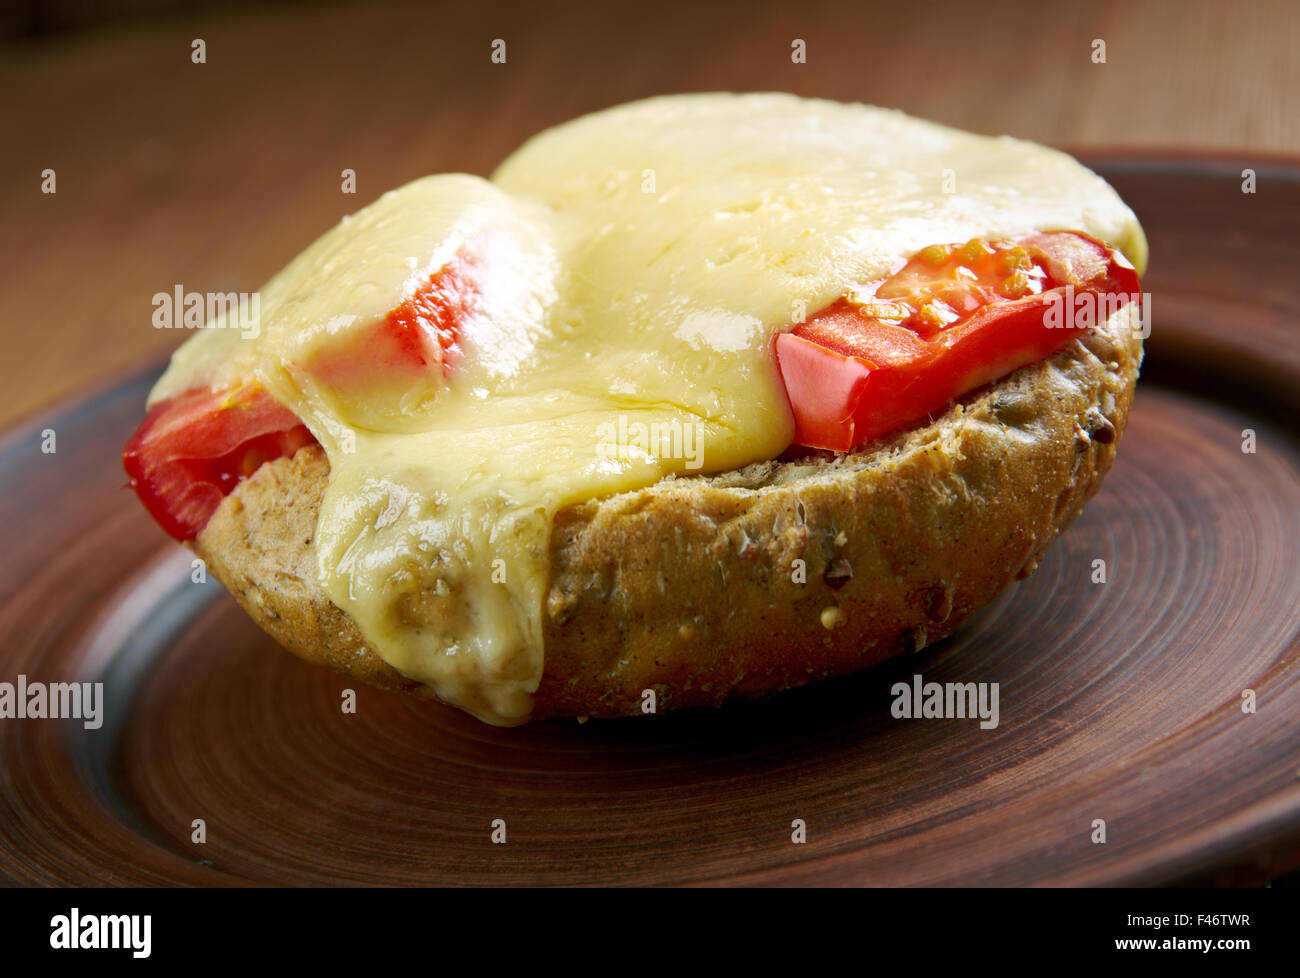 Irish rarebit - dish made with a savoury sauce of melted cheese of toasted bread.British cuisine Stock Photo